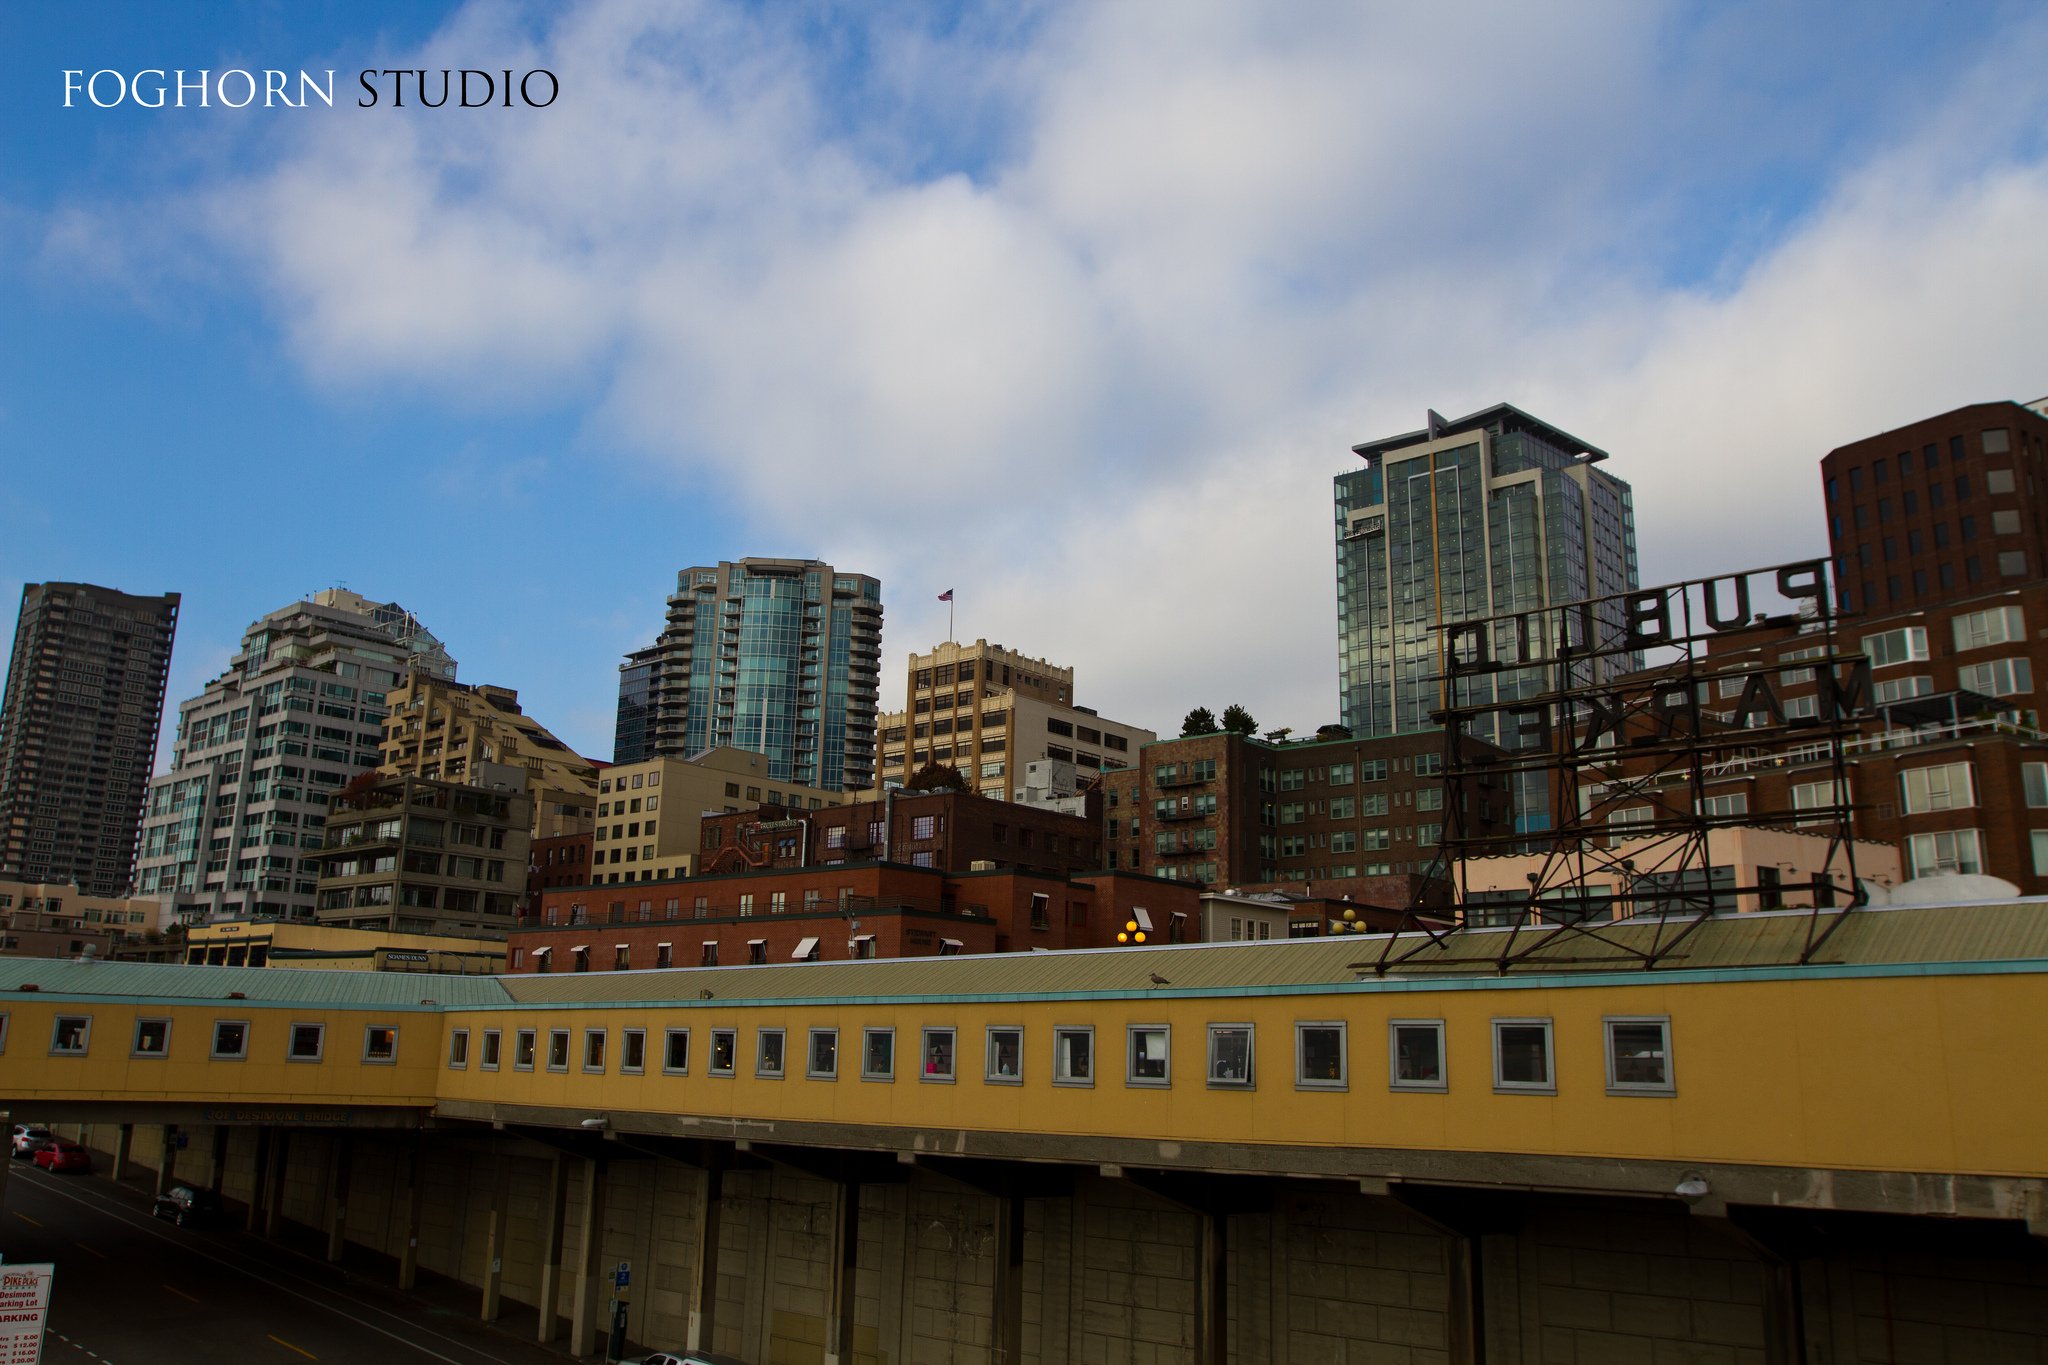 architecture, Bridges, Buildings, Cities, City, Downtown, Night, Offices, Storehouses, Stores, Towers, Usa, Docks, Port, Art, Seattle, Washington, Queen city, Jet city, Monorail Wallpaper